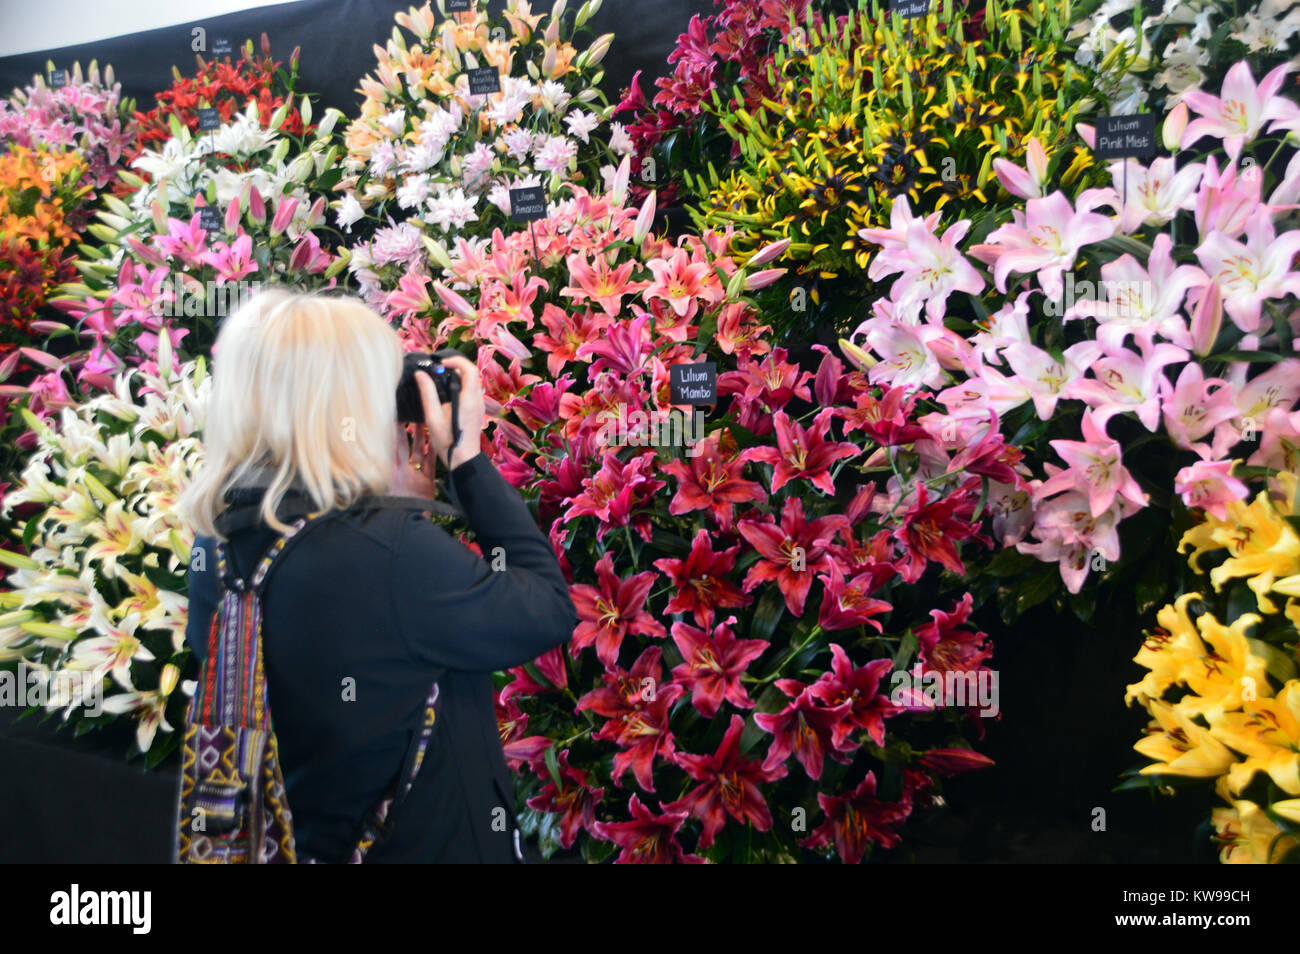 A Woman Photographer Taking Photos of Colourful Lilies on Display at the Harrogate Spring Show. Yorkshire, England, UK. Stock Photo